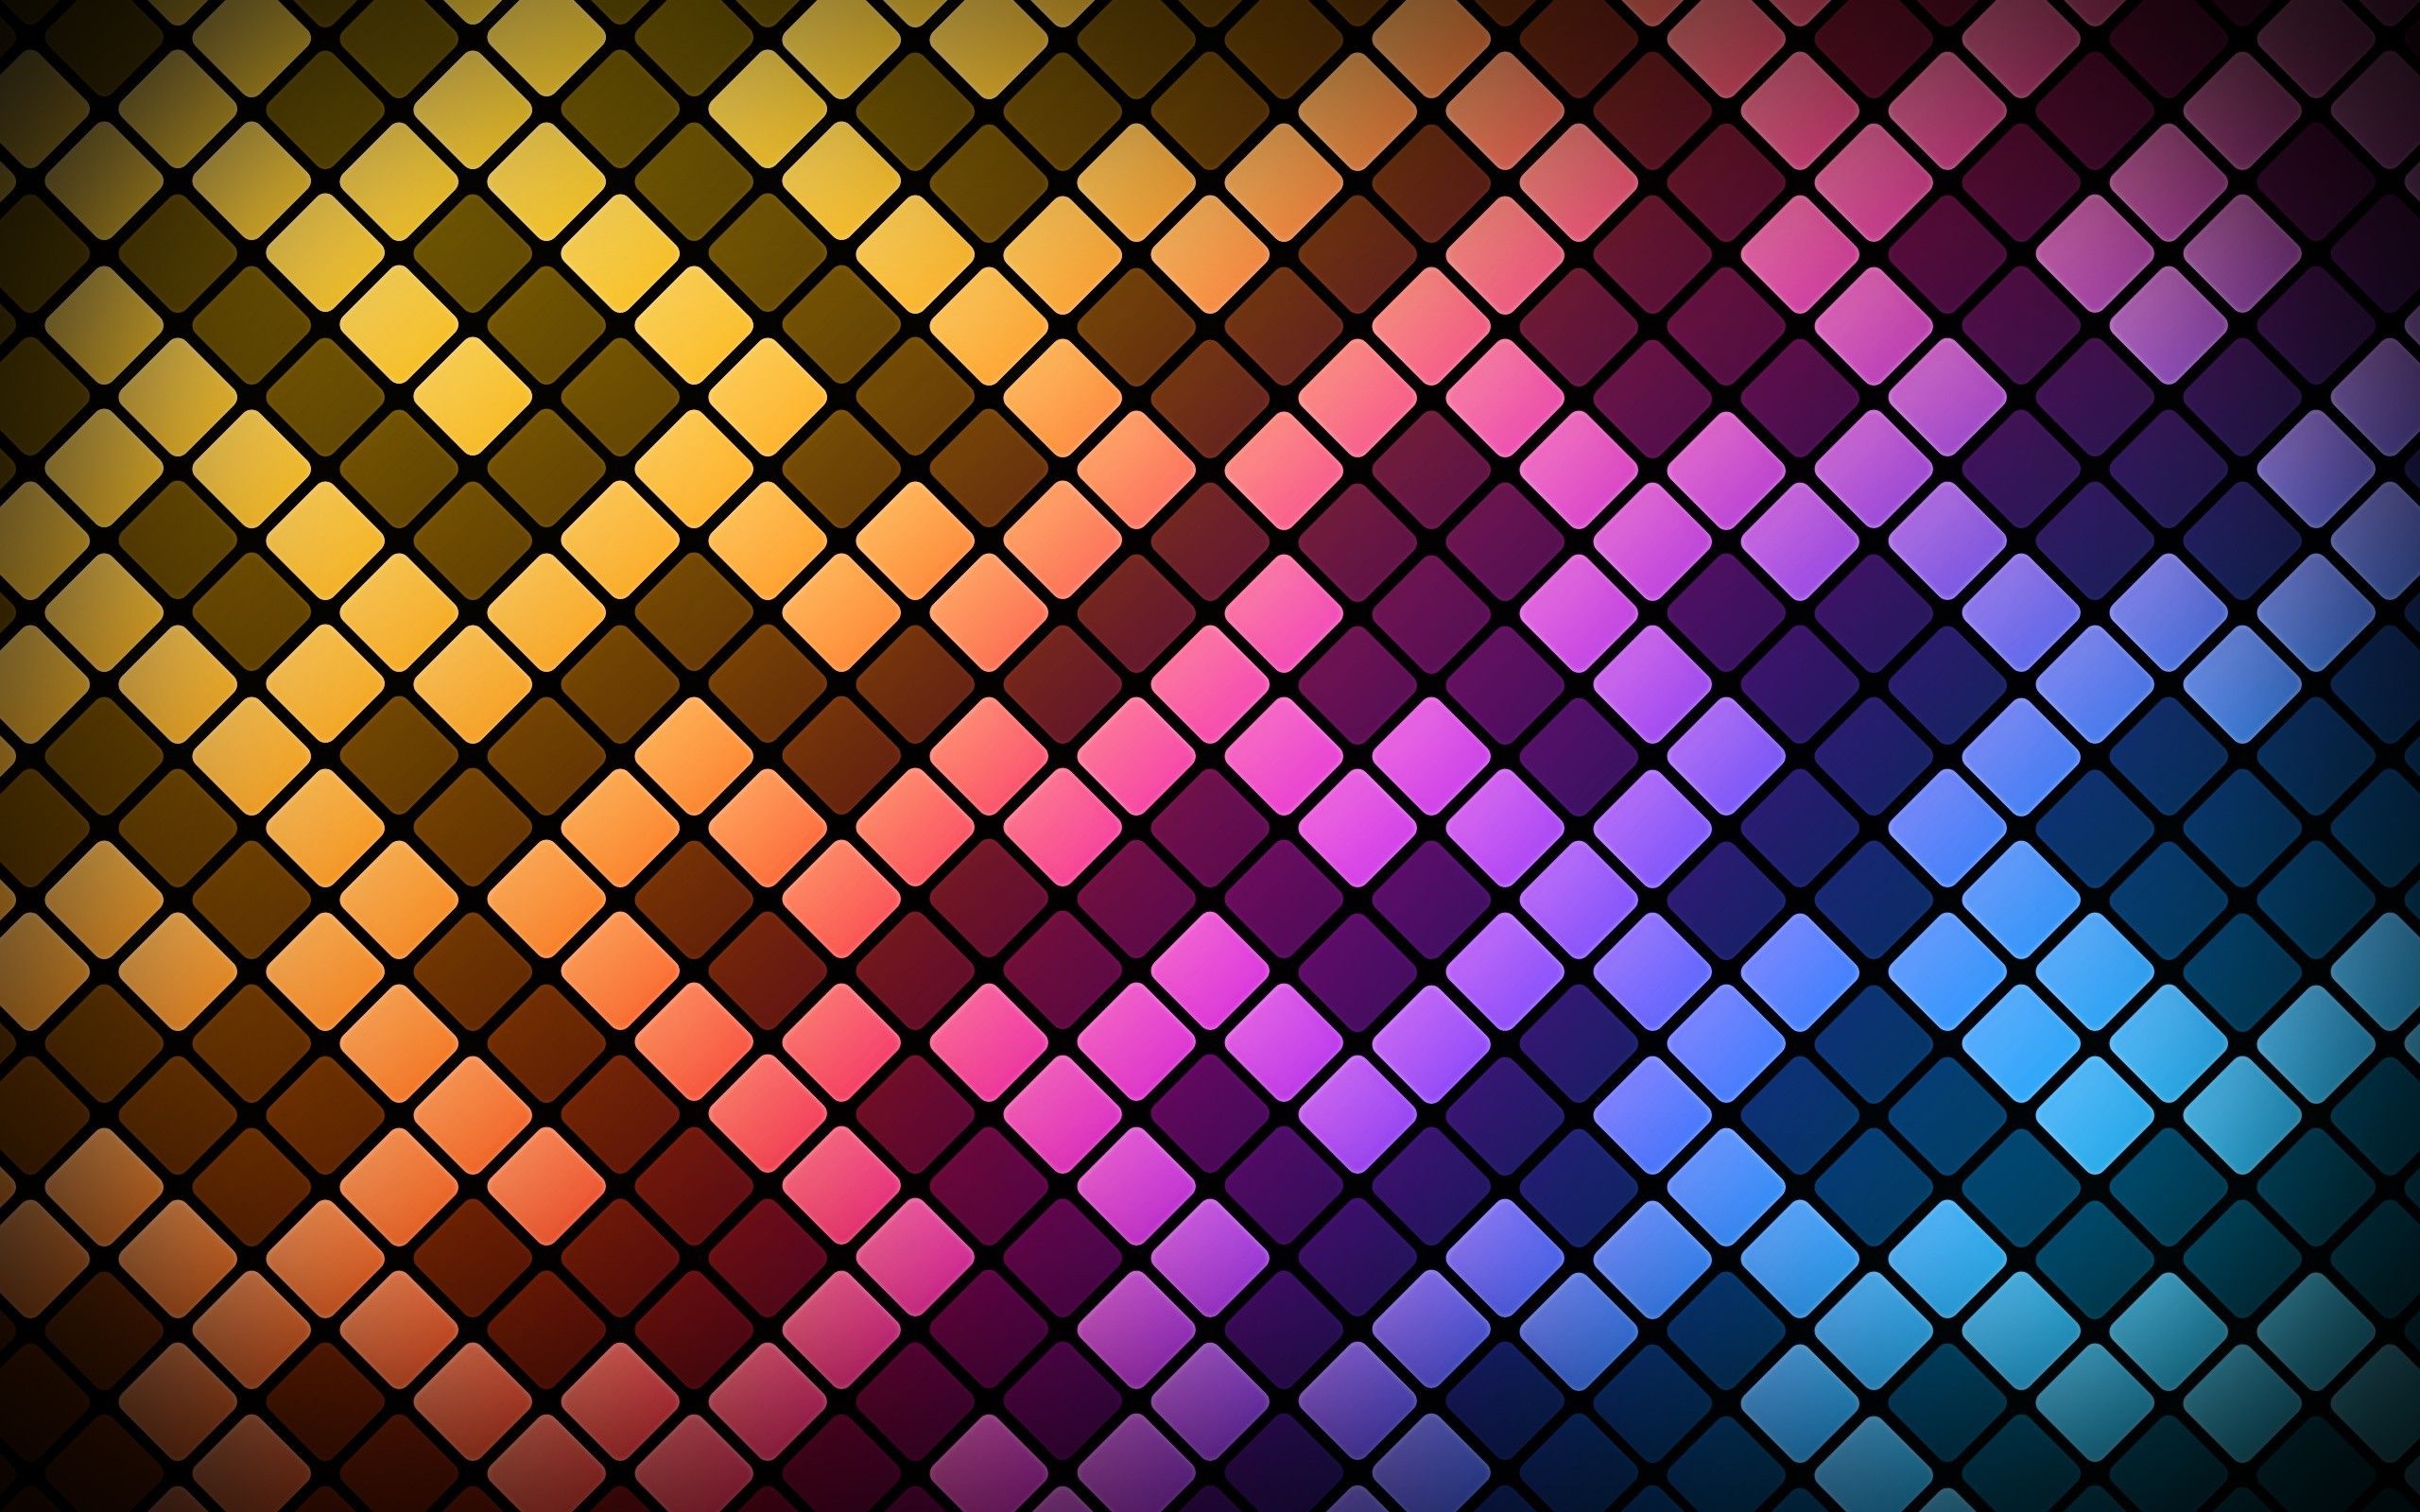 Square Wallpaper. Times Square New Year Wallpaper, BlackBerry Square Wallpaper and Times Square Wallpaper